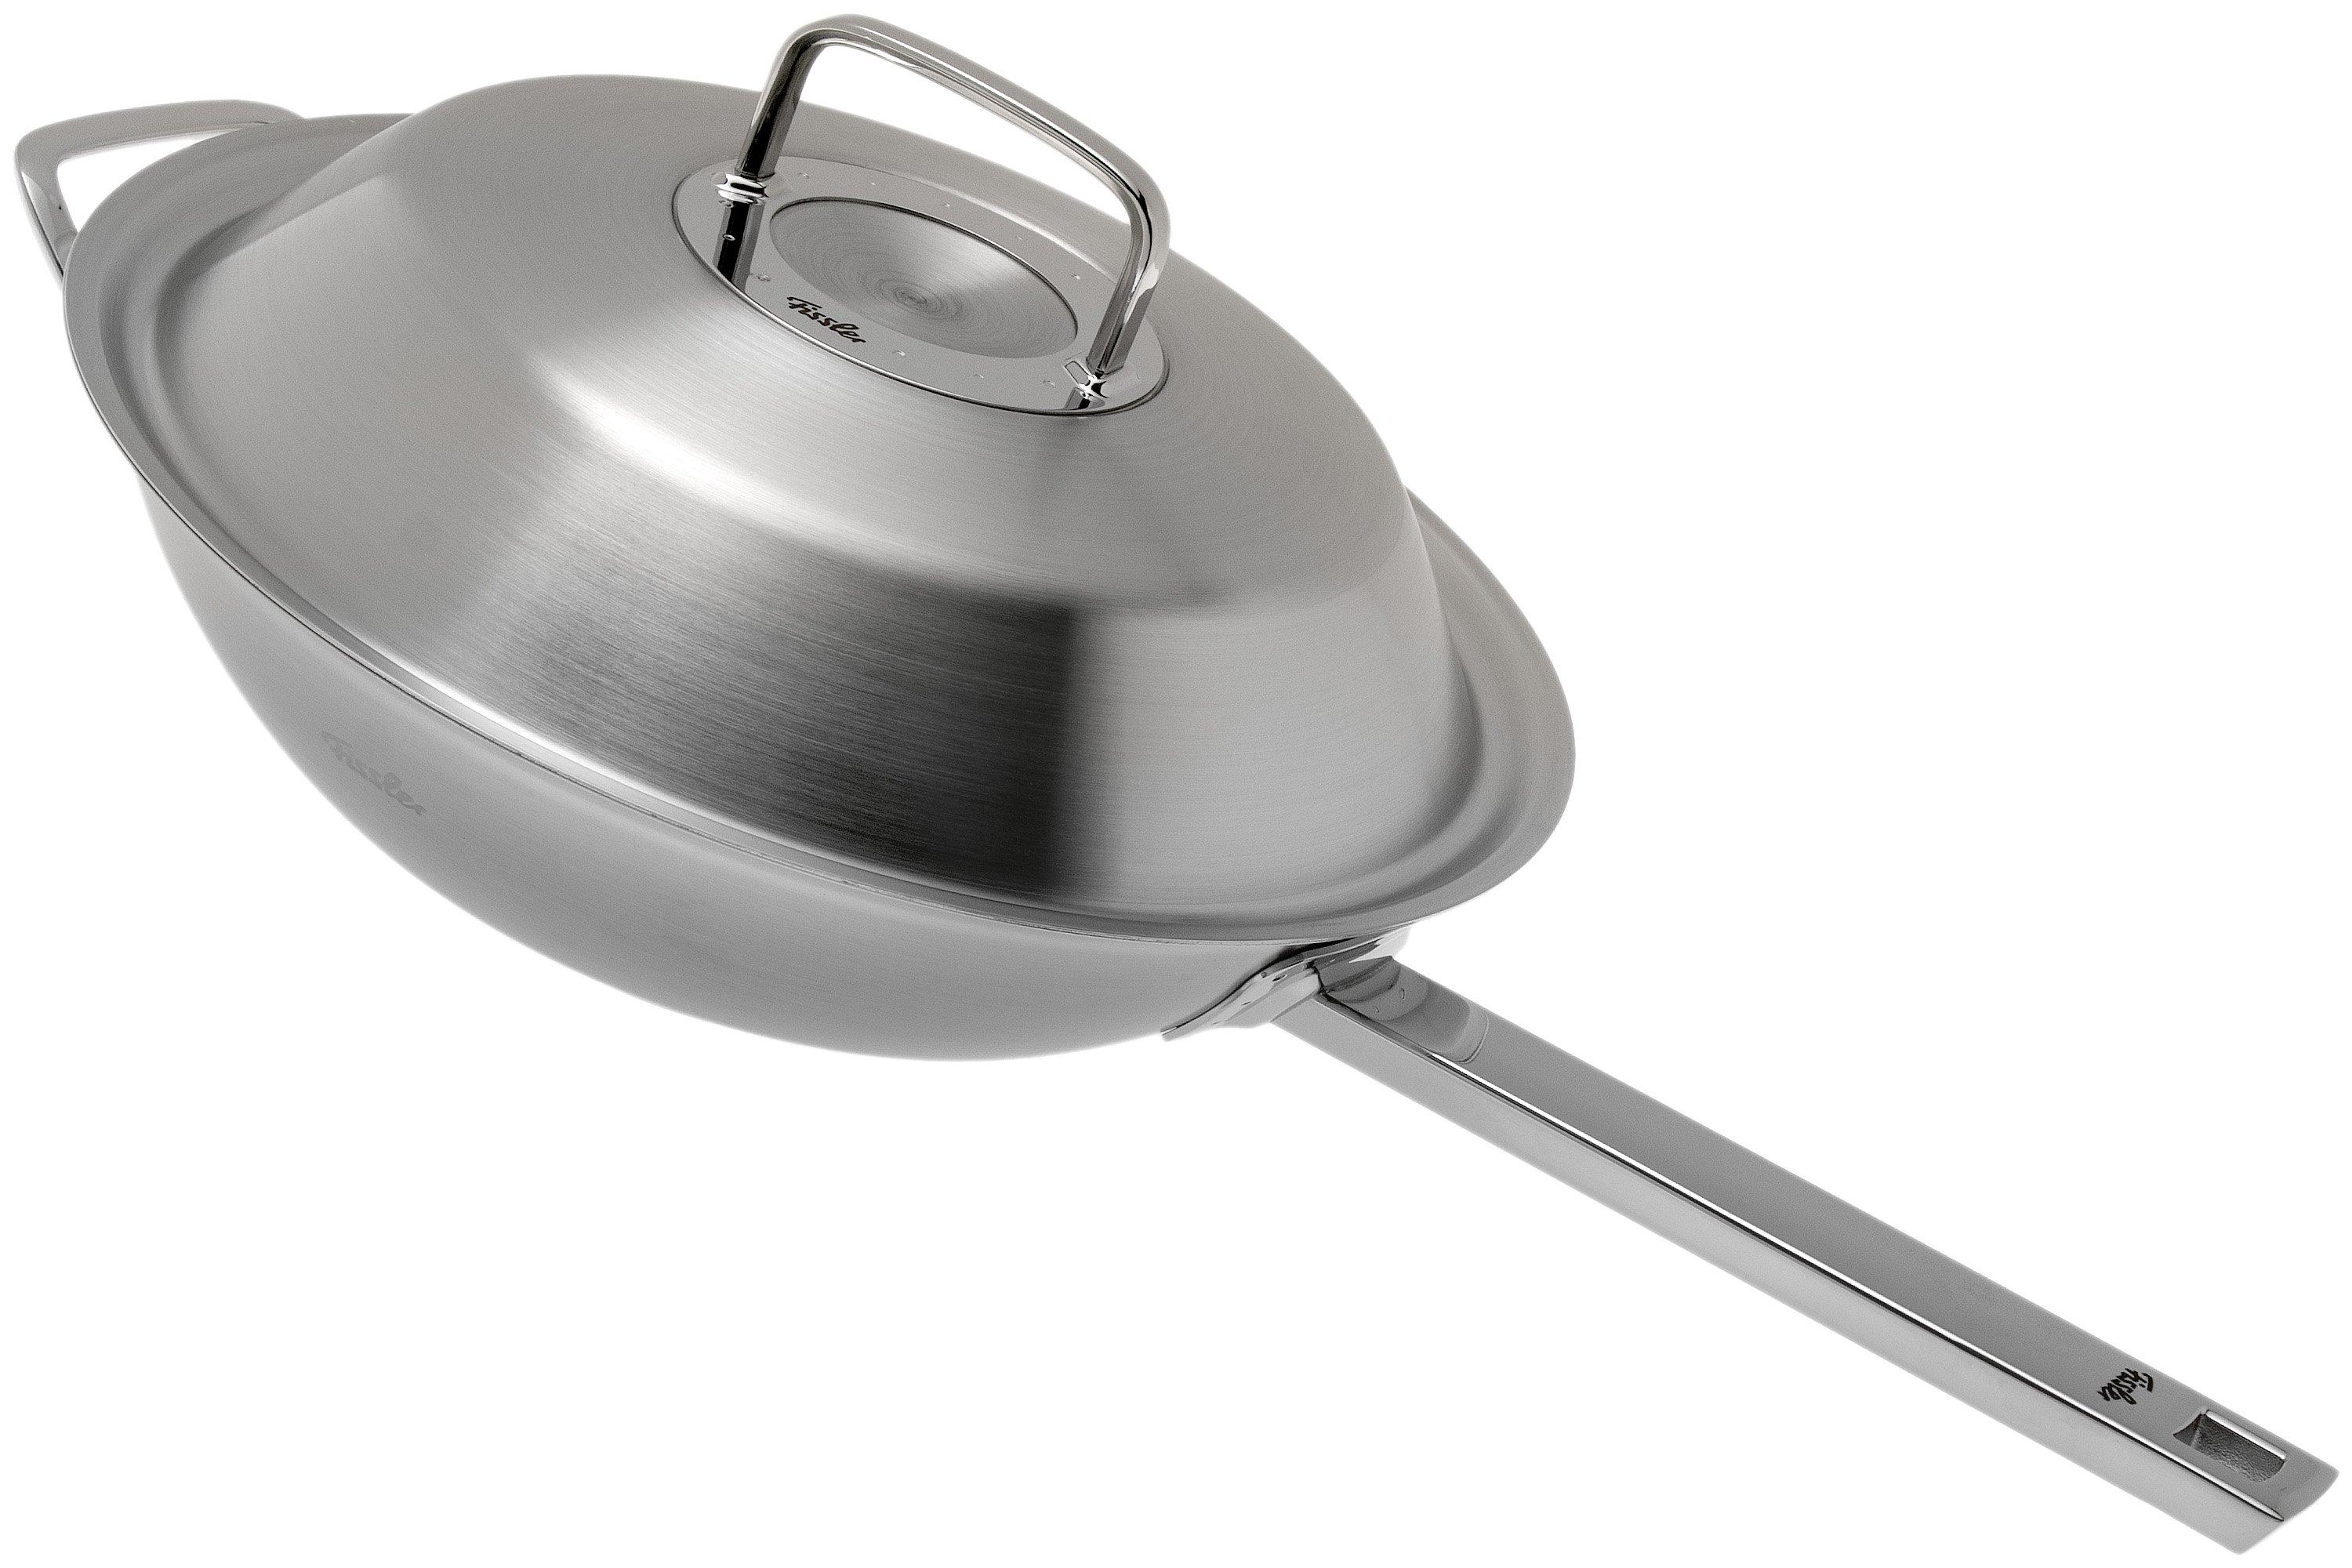 Fissler original-profi collection Wok With Lid 084-823-35-000/0 35 cm in Sturdy Non-sensitive Stainless Steel